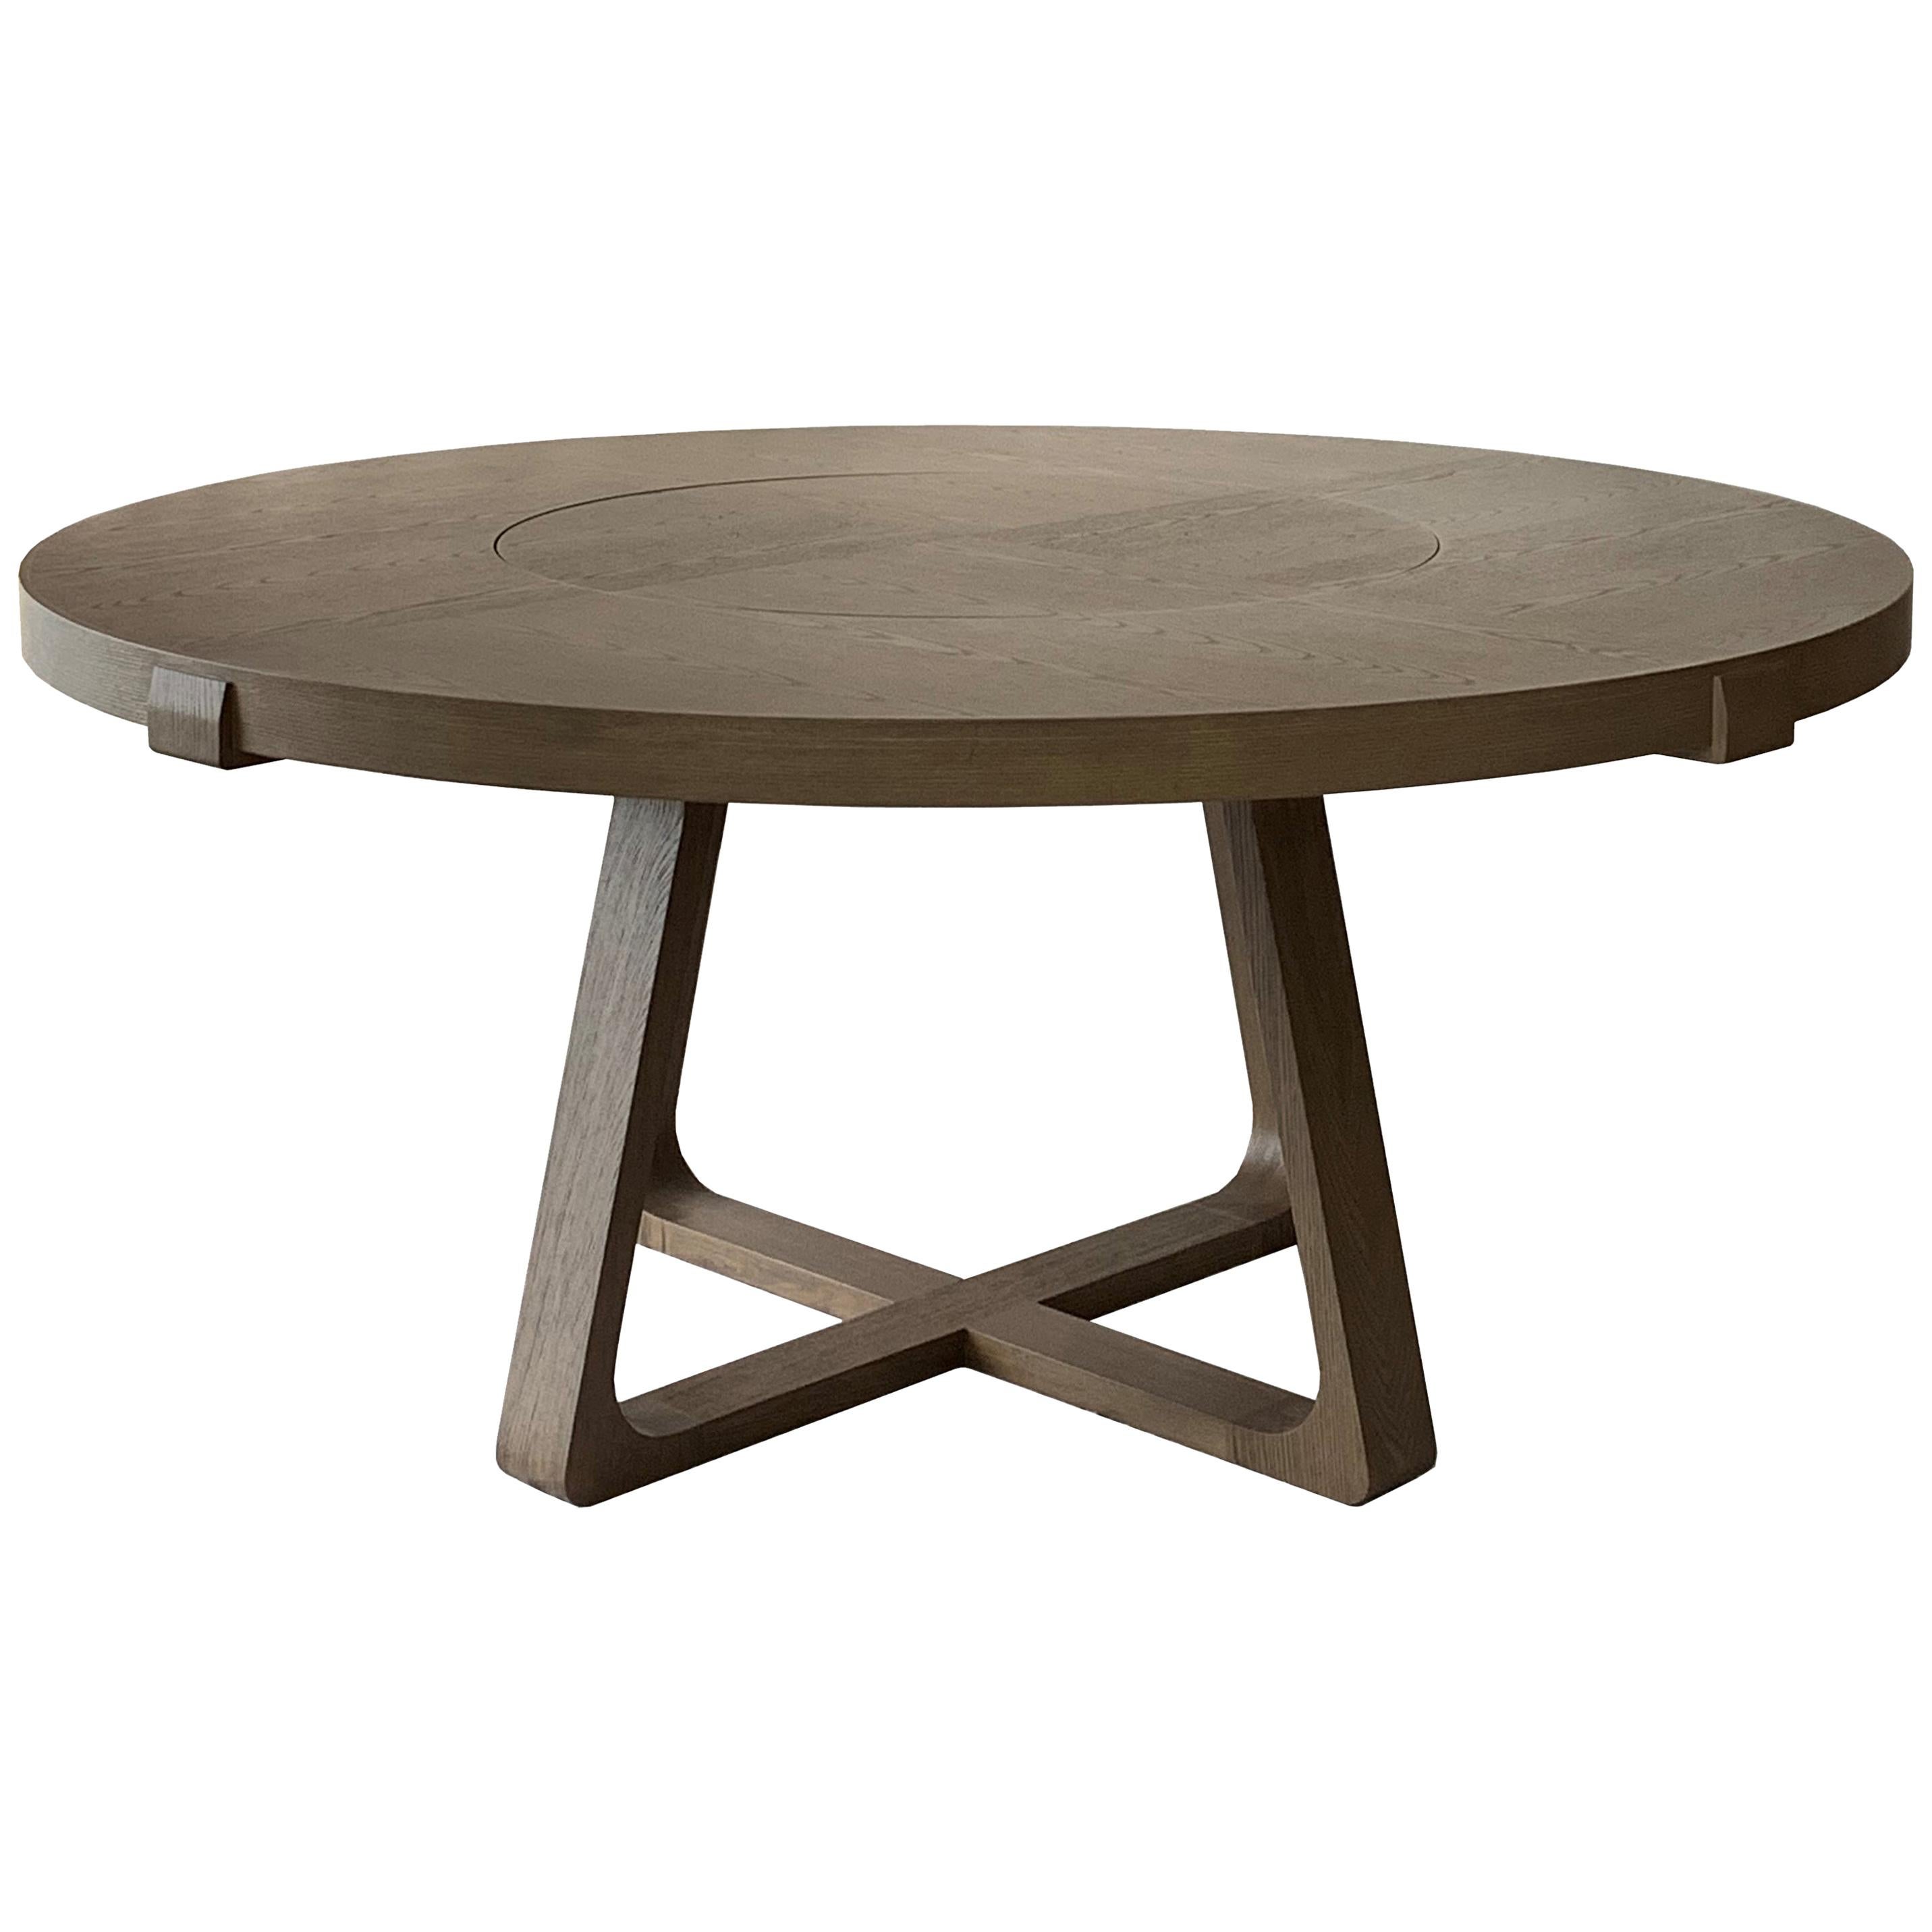 Round Dining Table With Lazy Susan 160cm Interlock André Fu Living Grey Oak New For Sale